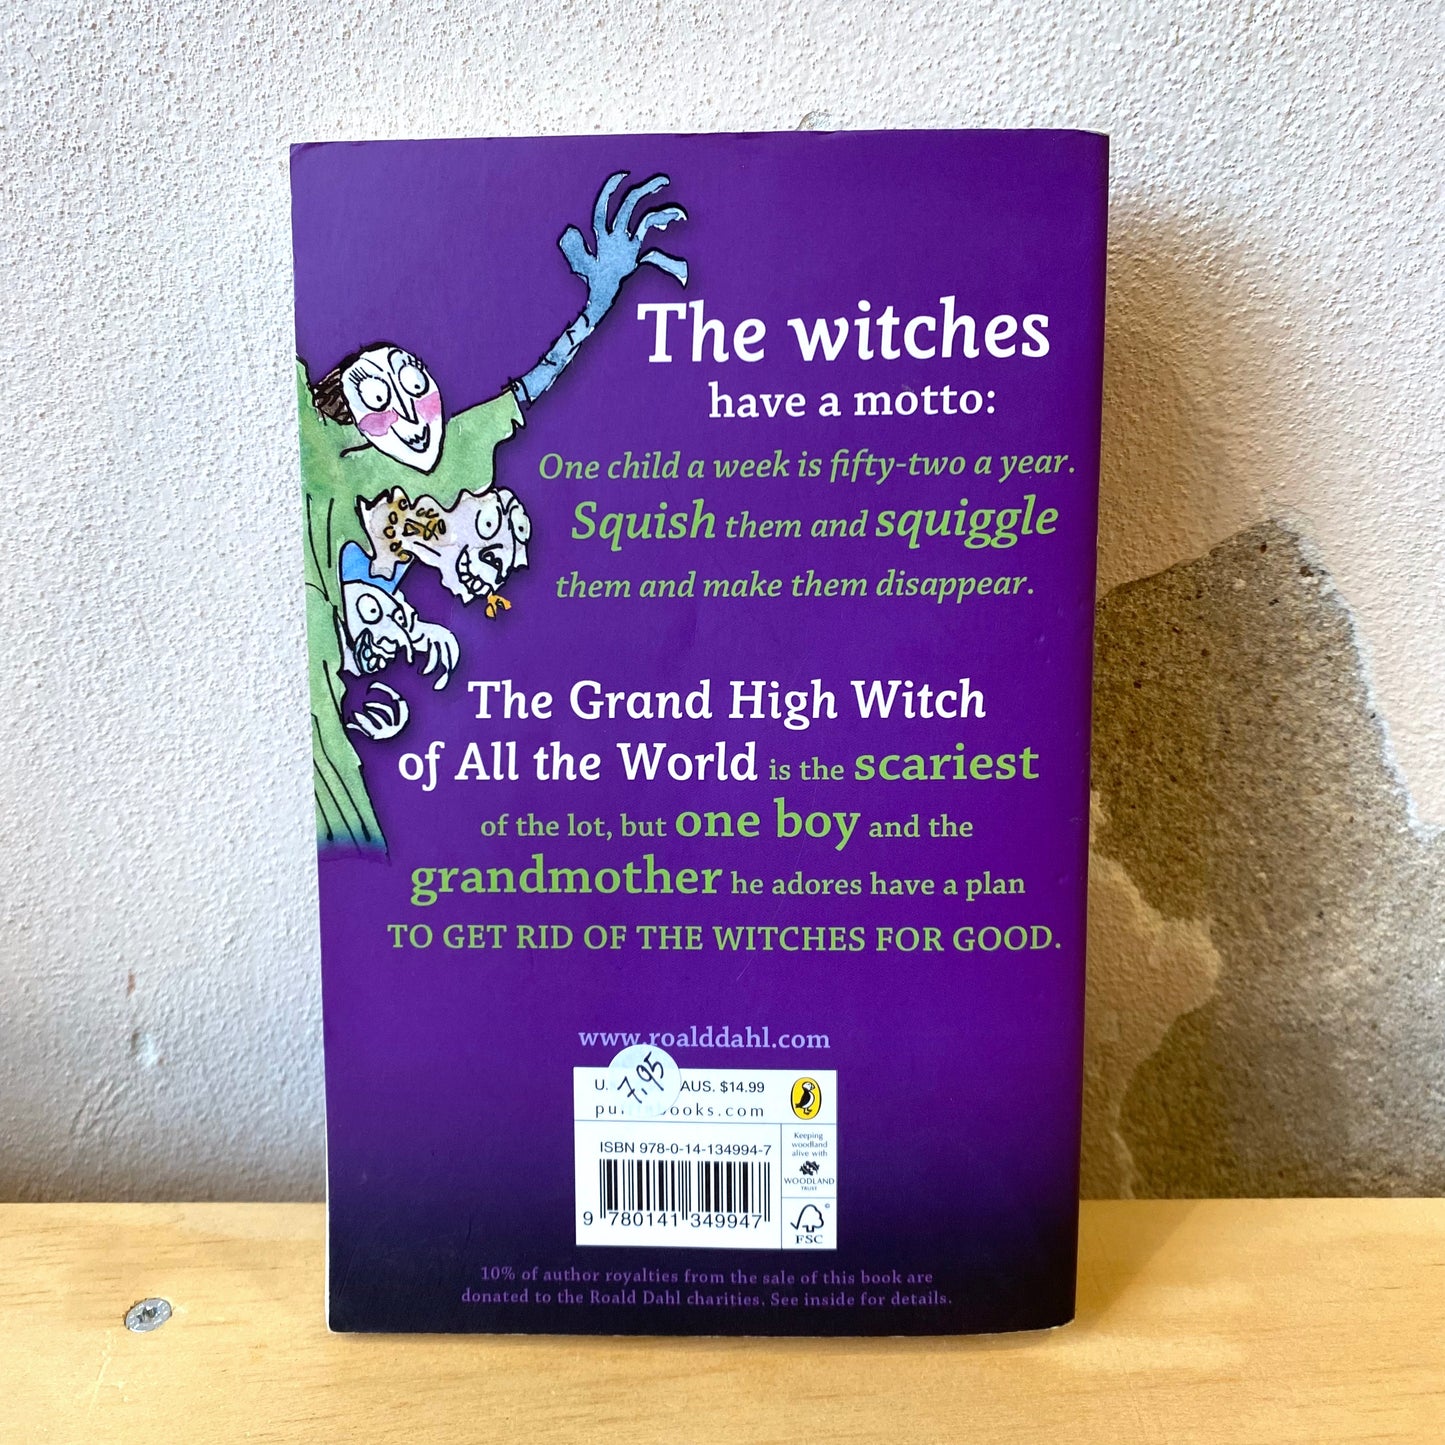 The Witches / Roald Dahl, Quentin Blake